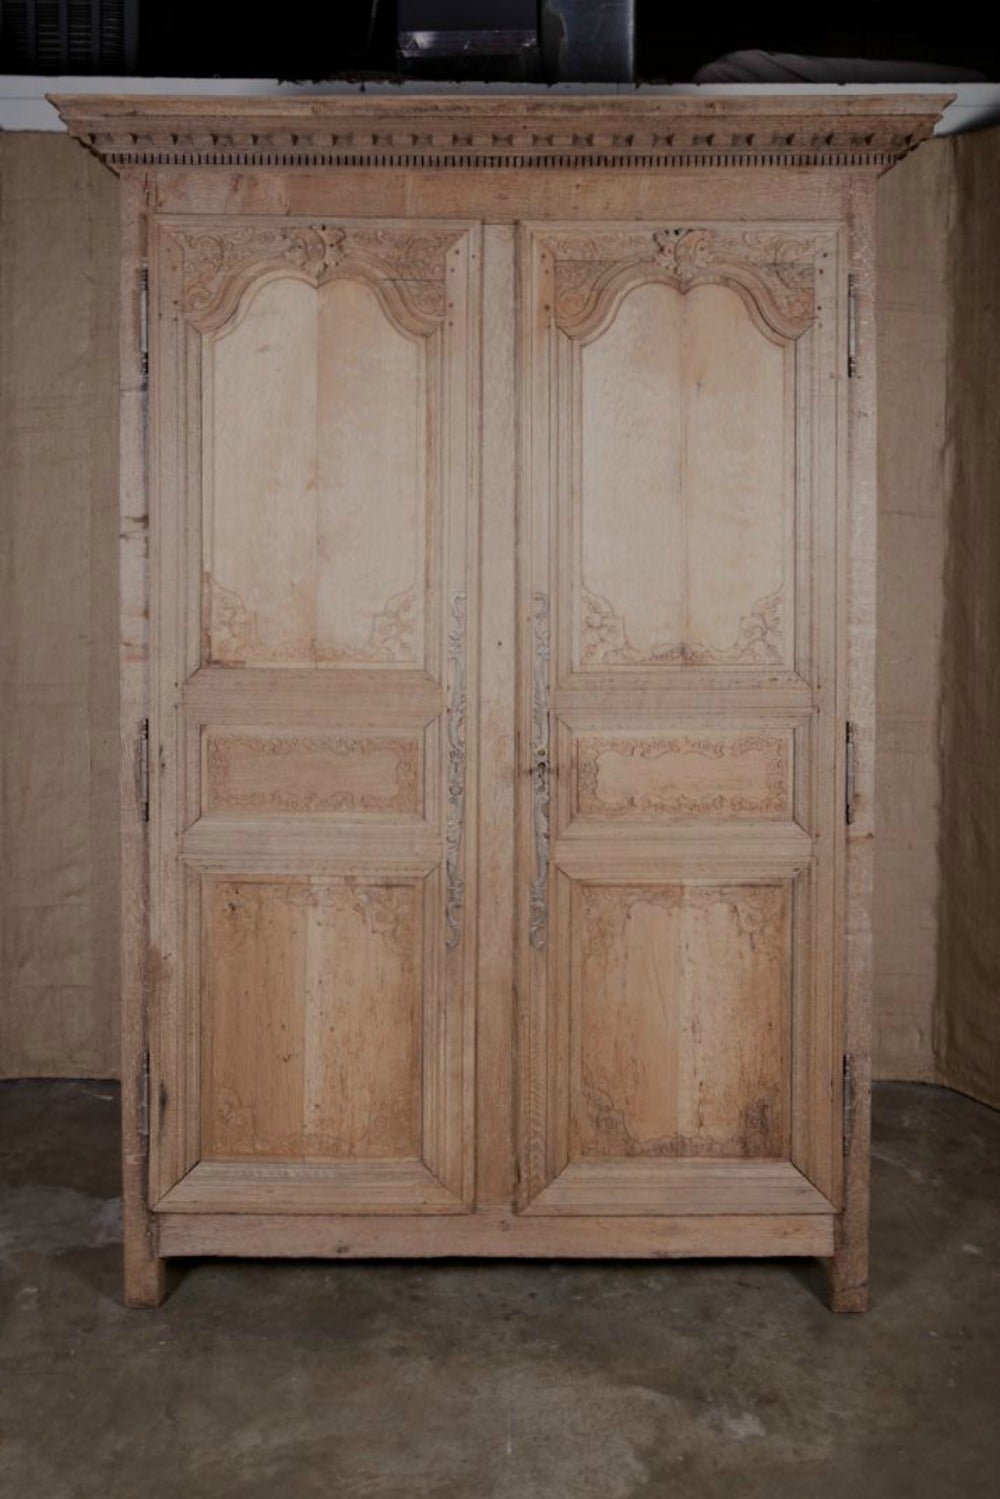 Late 18th century Country French washed oak armoire handcrafted by rural artisans, featuring timeless Louis XIV inspired motifs. The intricately carved crown with rows of dentil molding, sits above a pair of paneled doors with floral and foliate